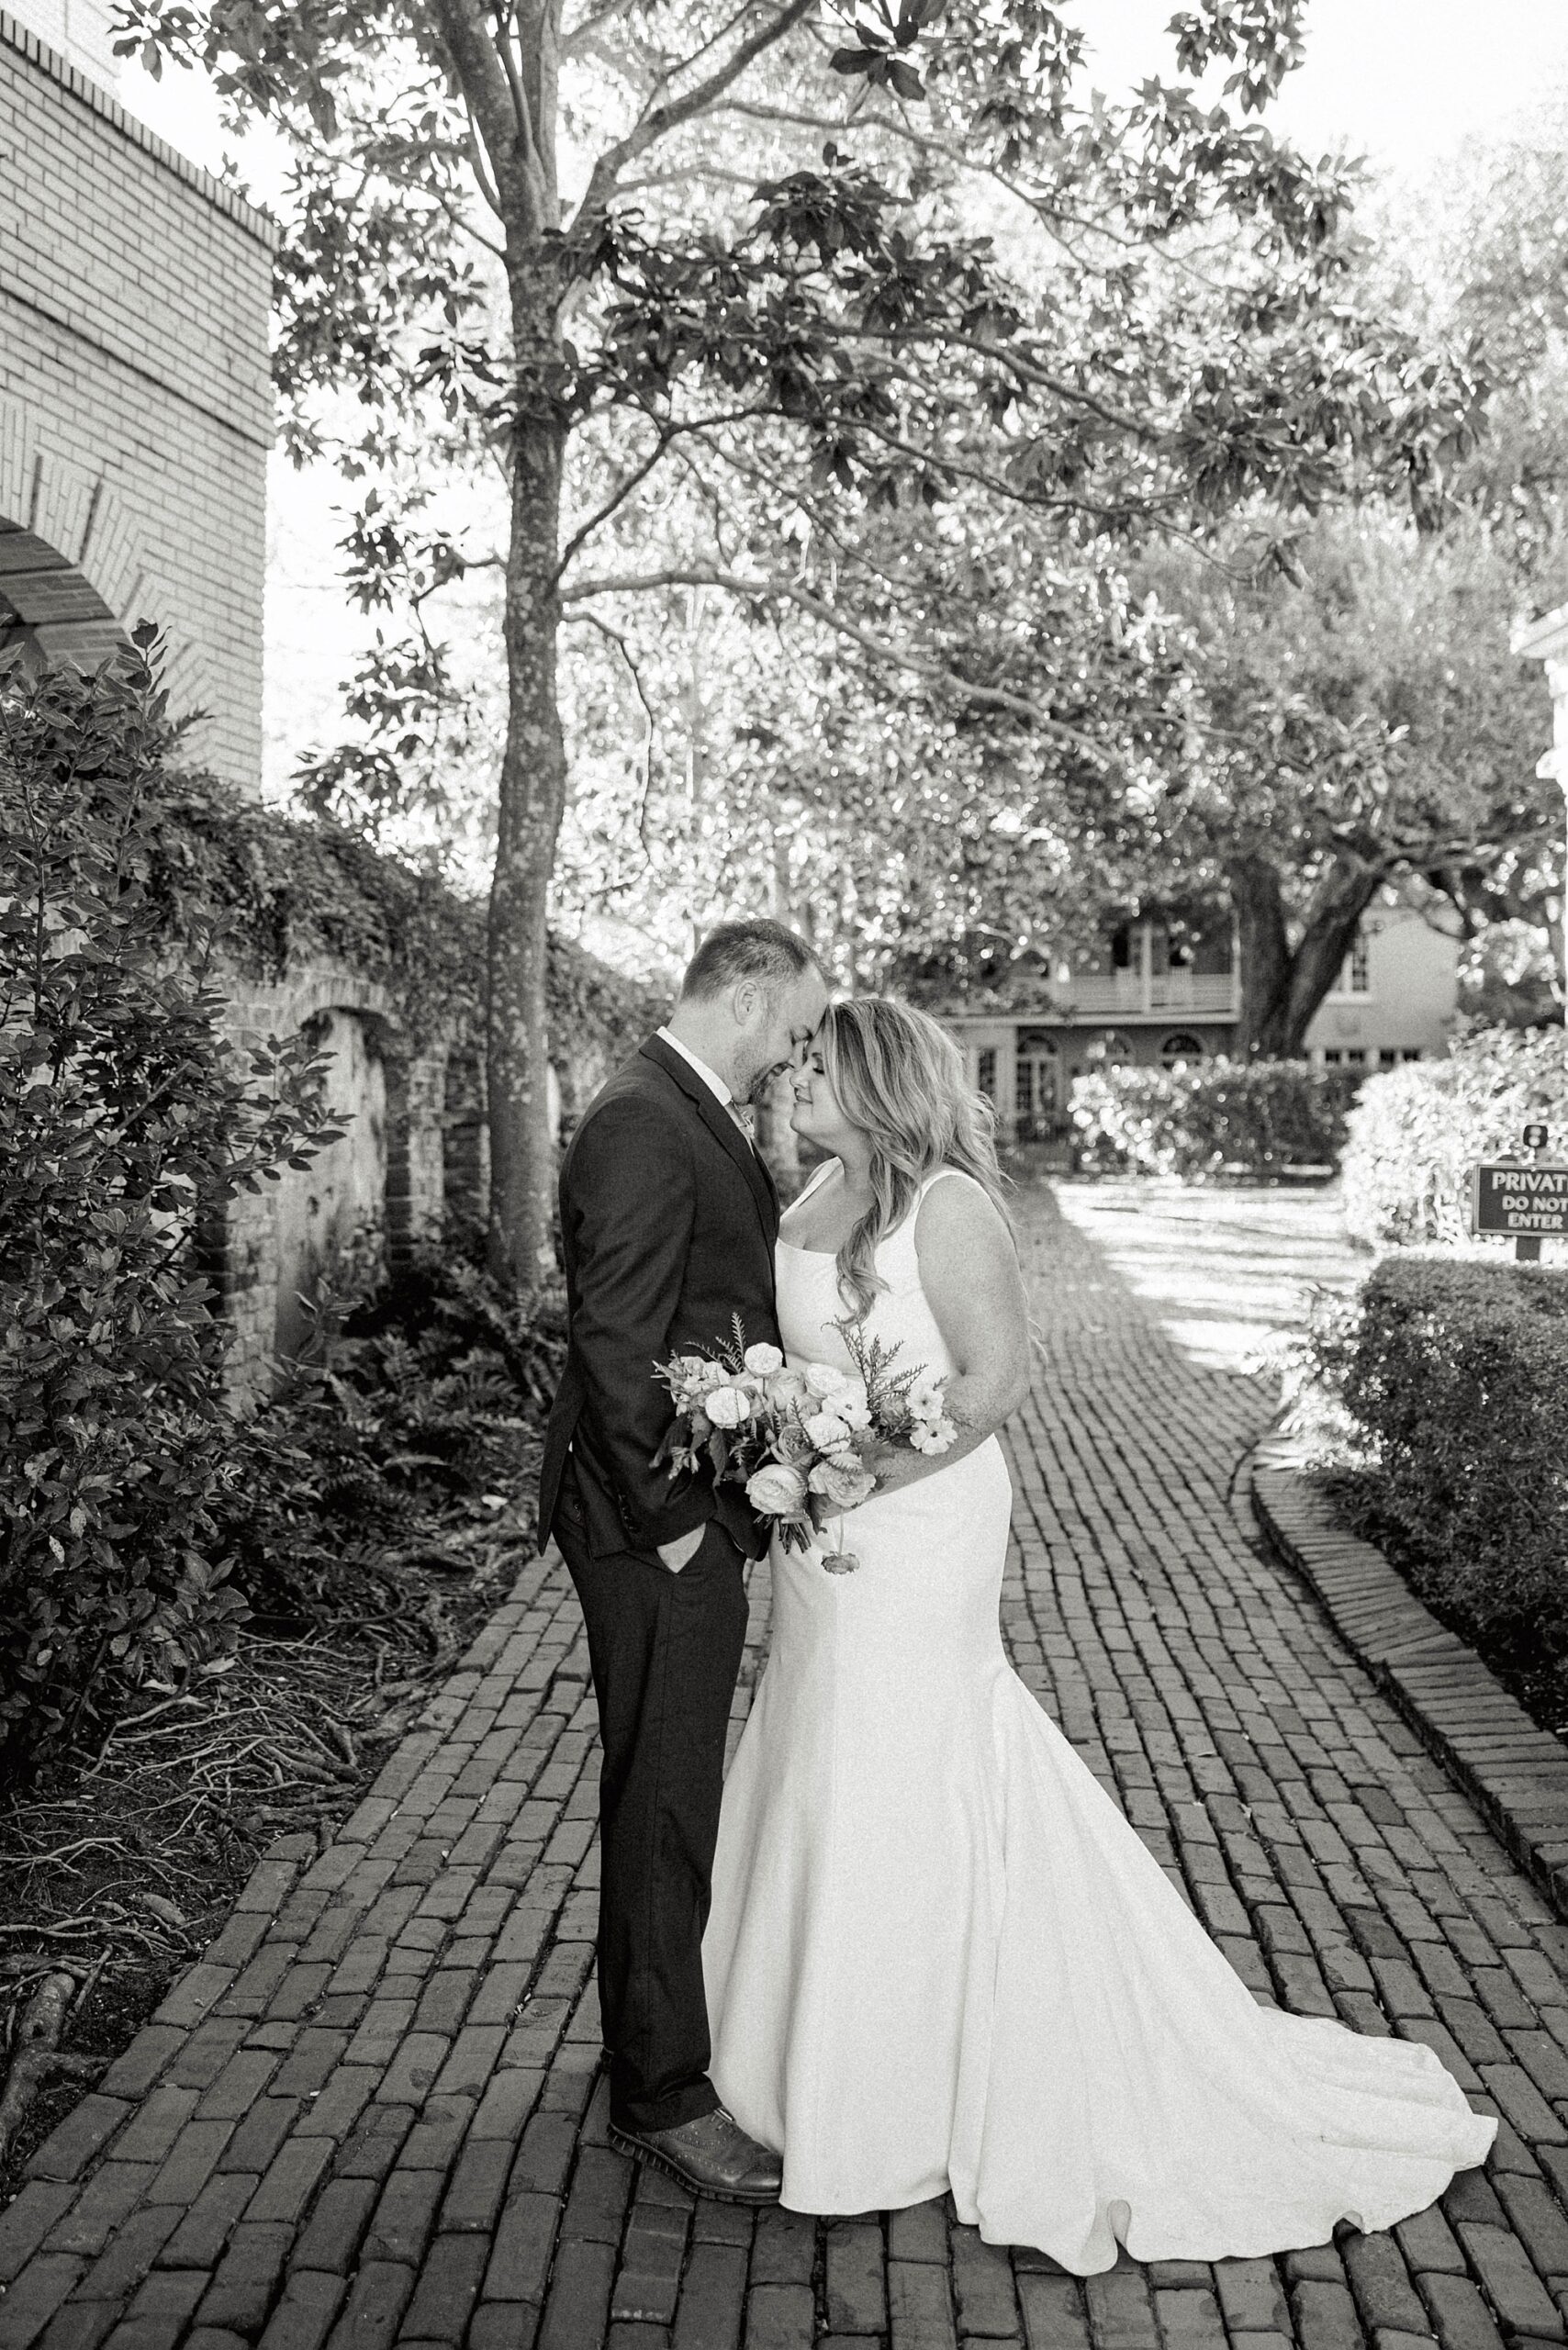 black and white portrait of bride and groom leaning for a kiss on cobblestone street